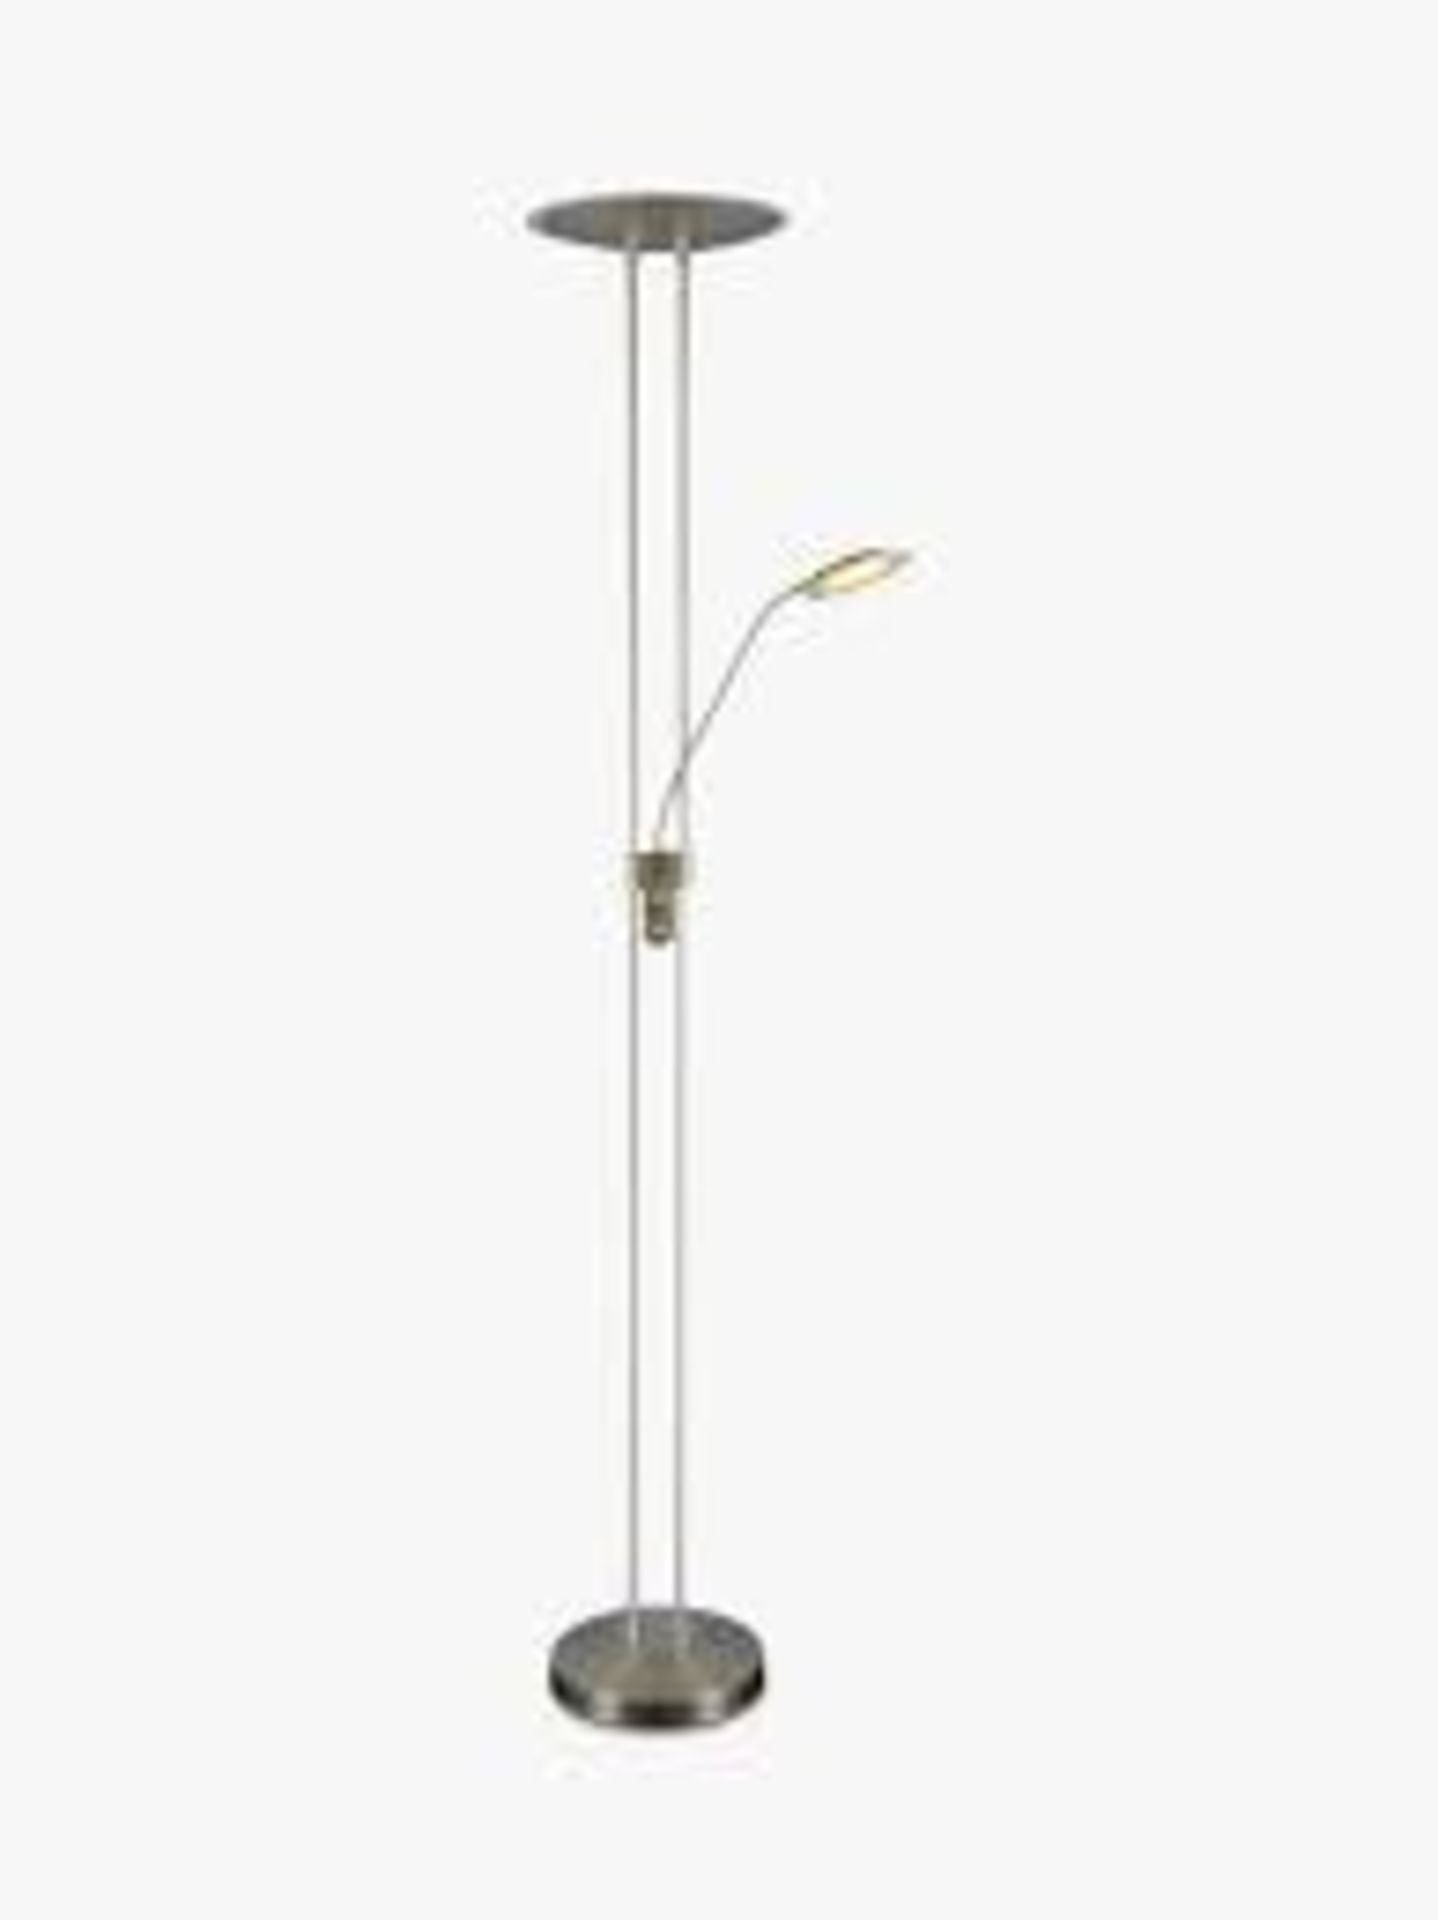 Boxed John Lewis And Partners Wrigley Uplighter Floor Lamp RRP £195 (2577953) (Public Viewing and